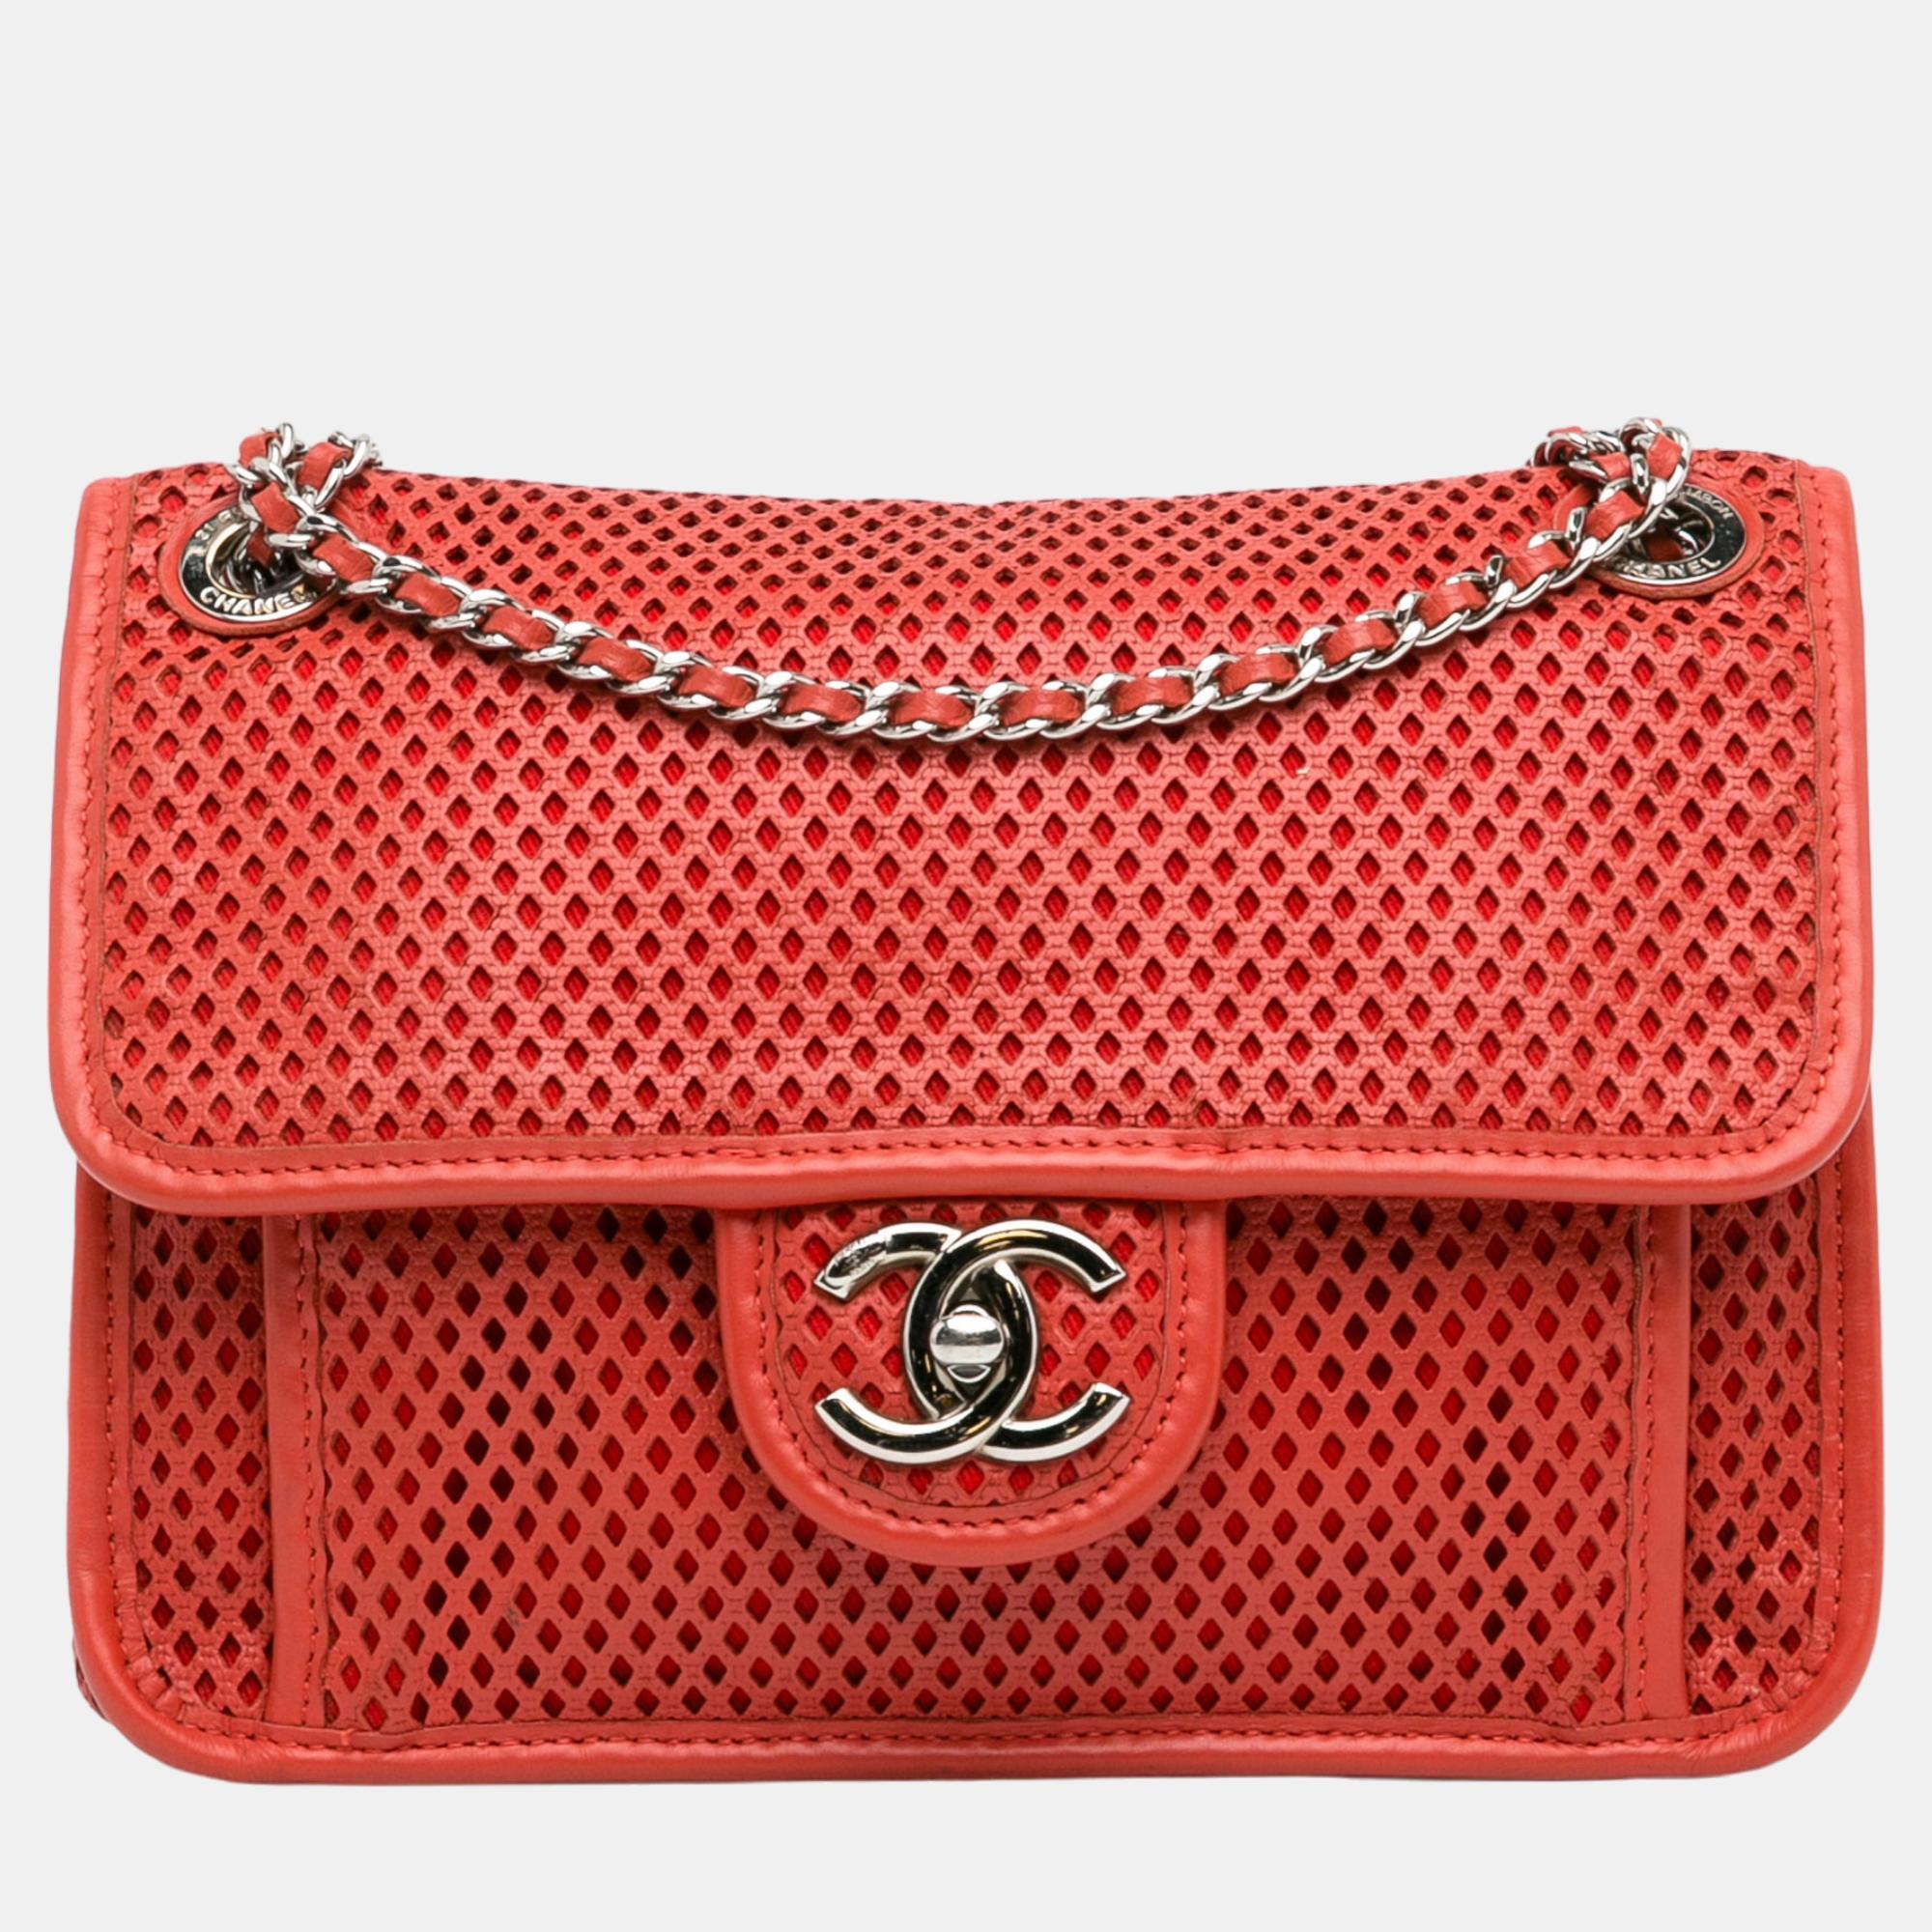 Chanel red small perforated calfskin up in the air flap